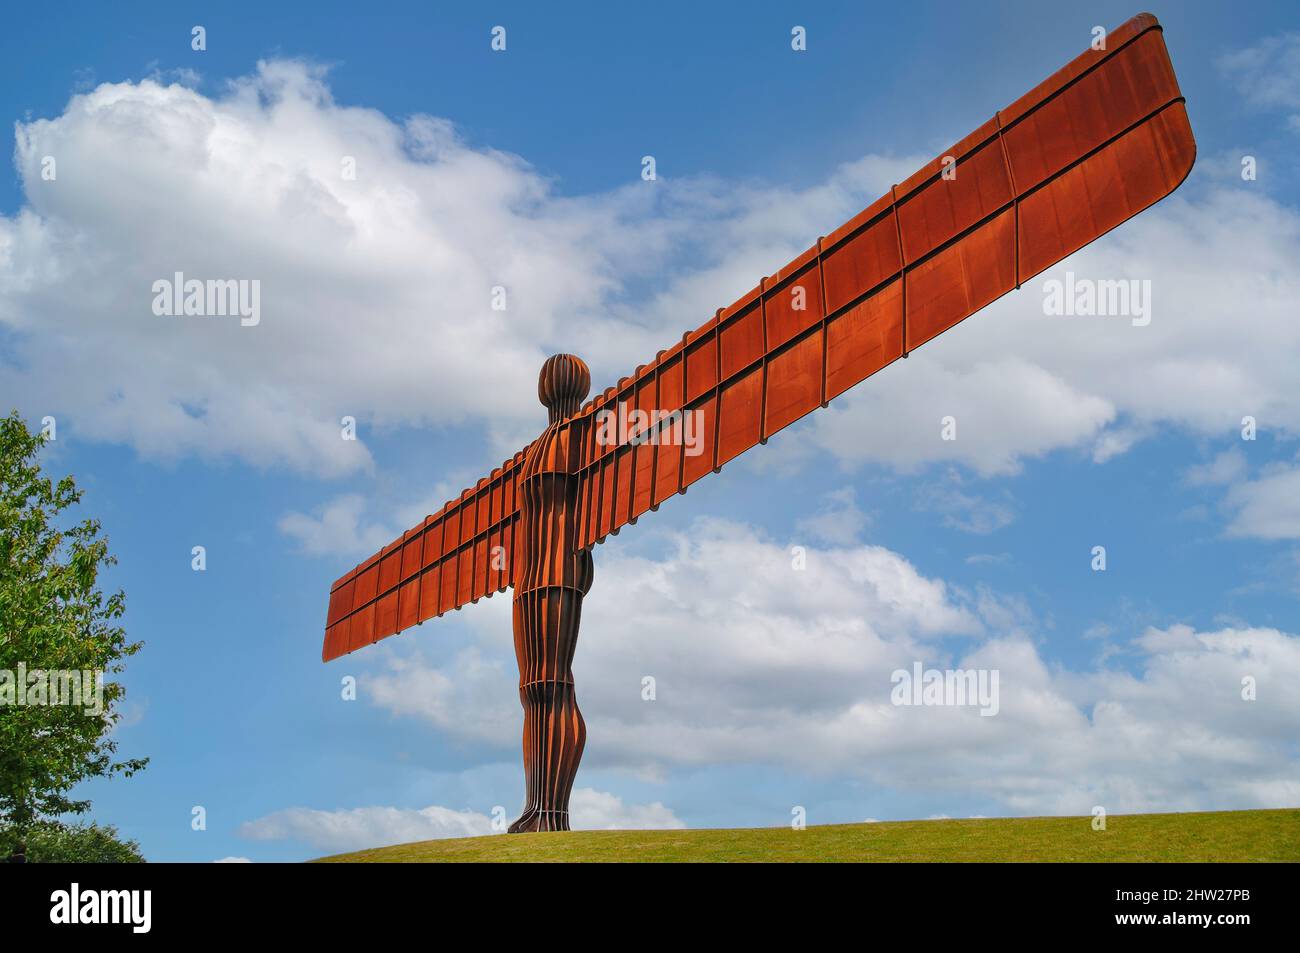 The 'Angel of the North' sculpture, Gateshead, Tyne and Wear, England, United Kingdom Stock Photo